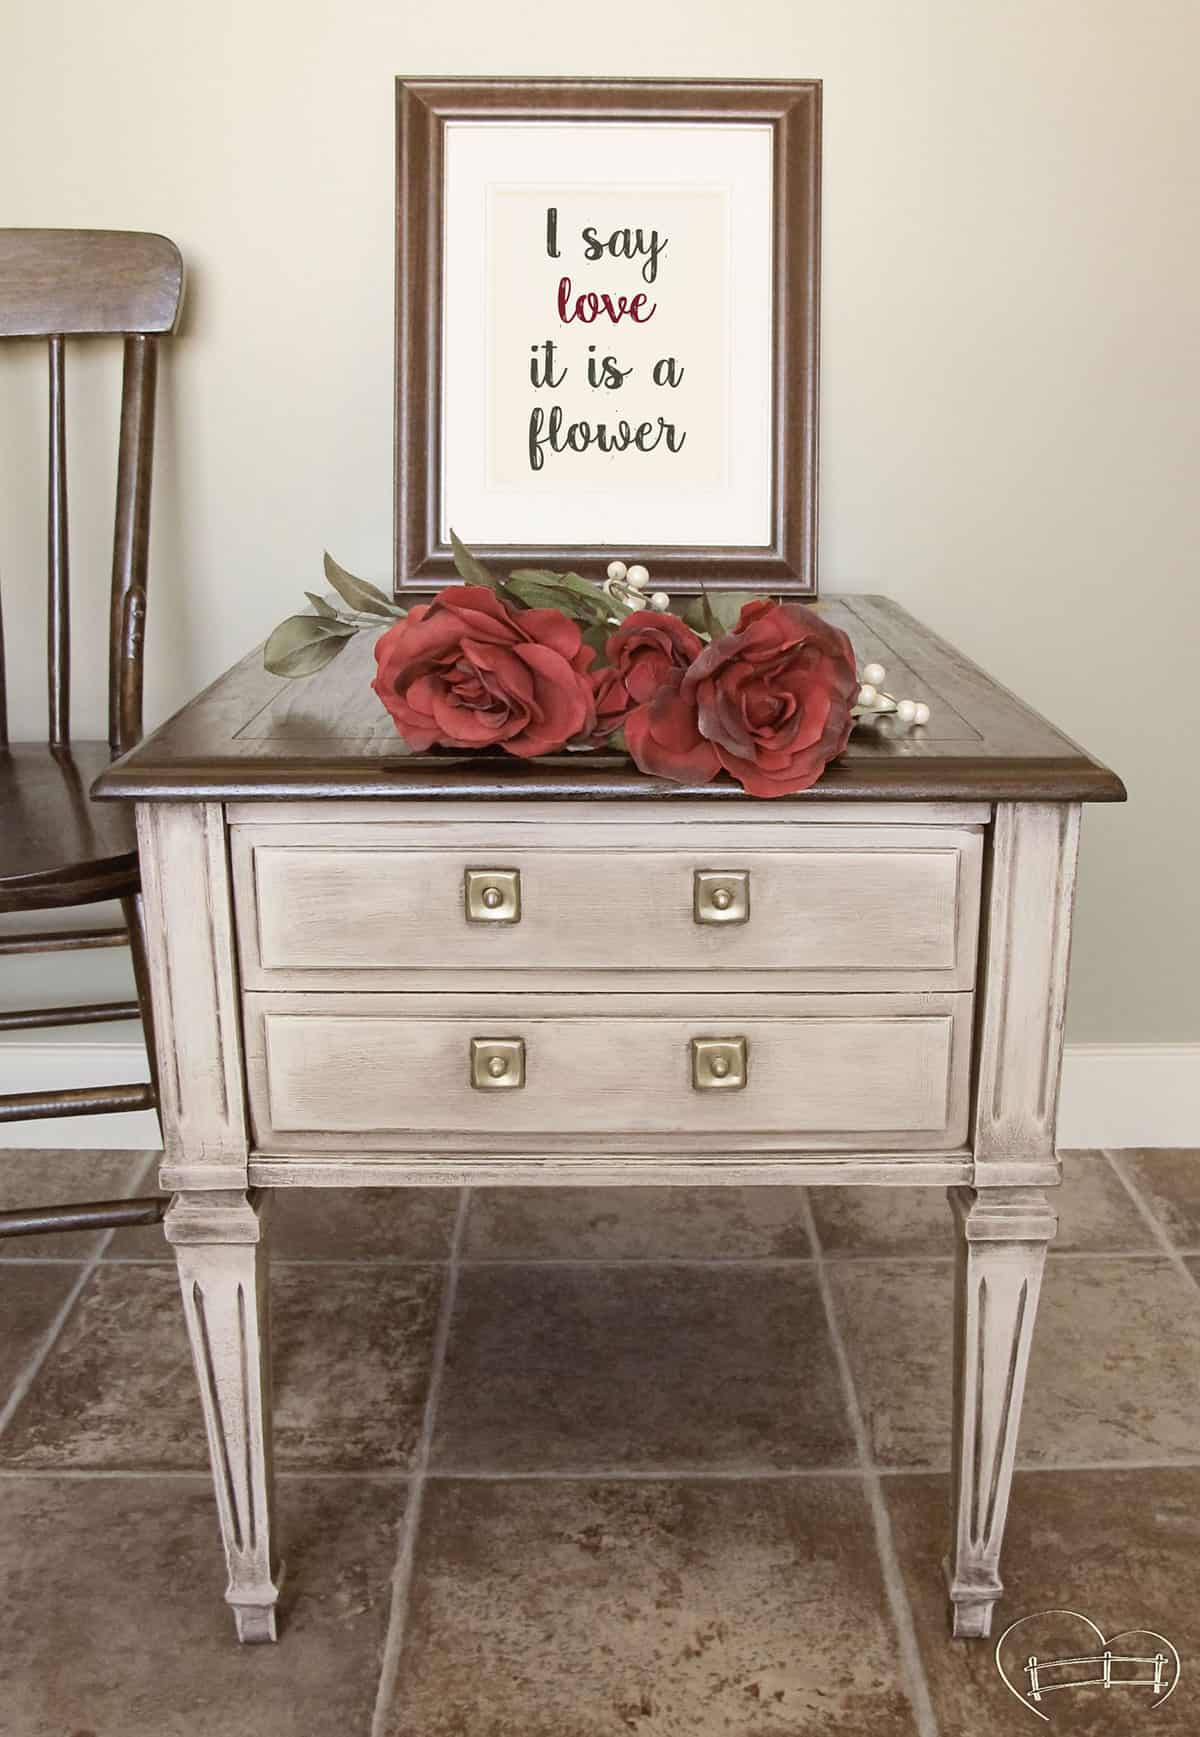 My "Oh for Goodness Sake” End Table #DIY #furniturepaint #paintedfurniture #homedecor #antique #chalkpaint #sidetable #endtable #wax #offwhite #countrychicpaint - blog.countrychicpaint.com